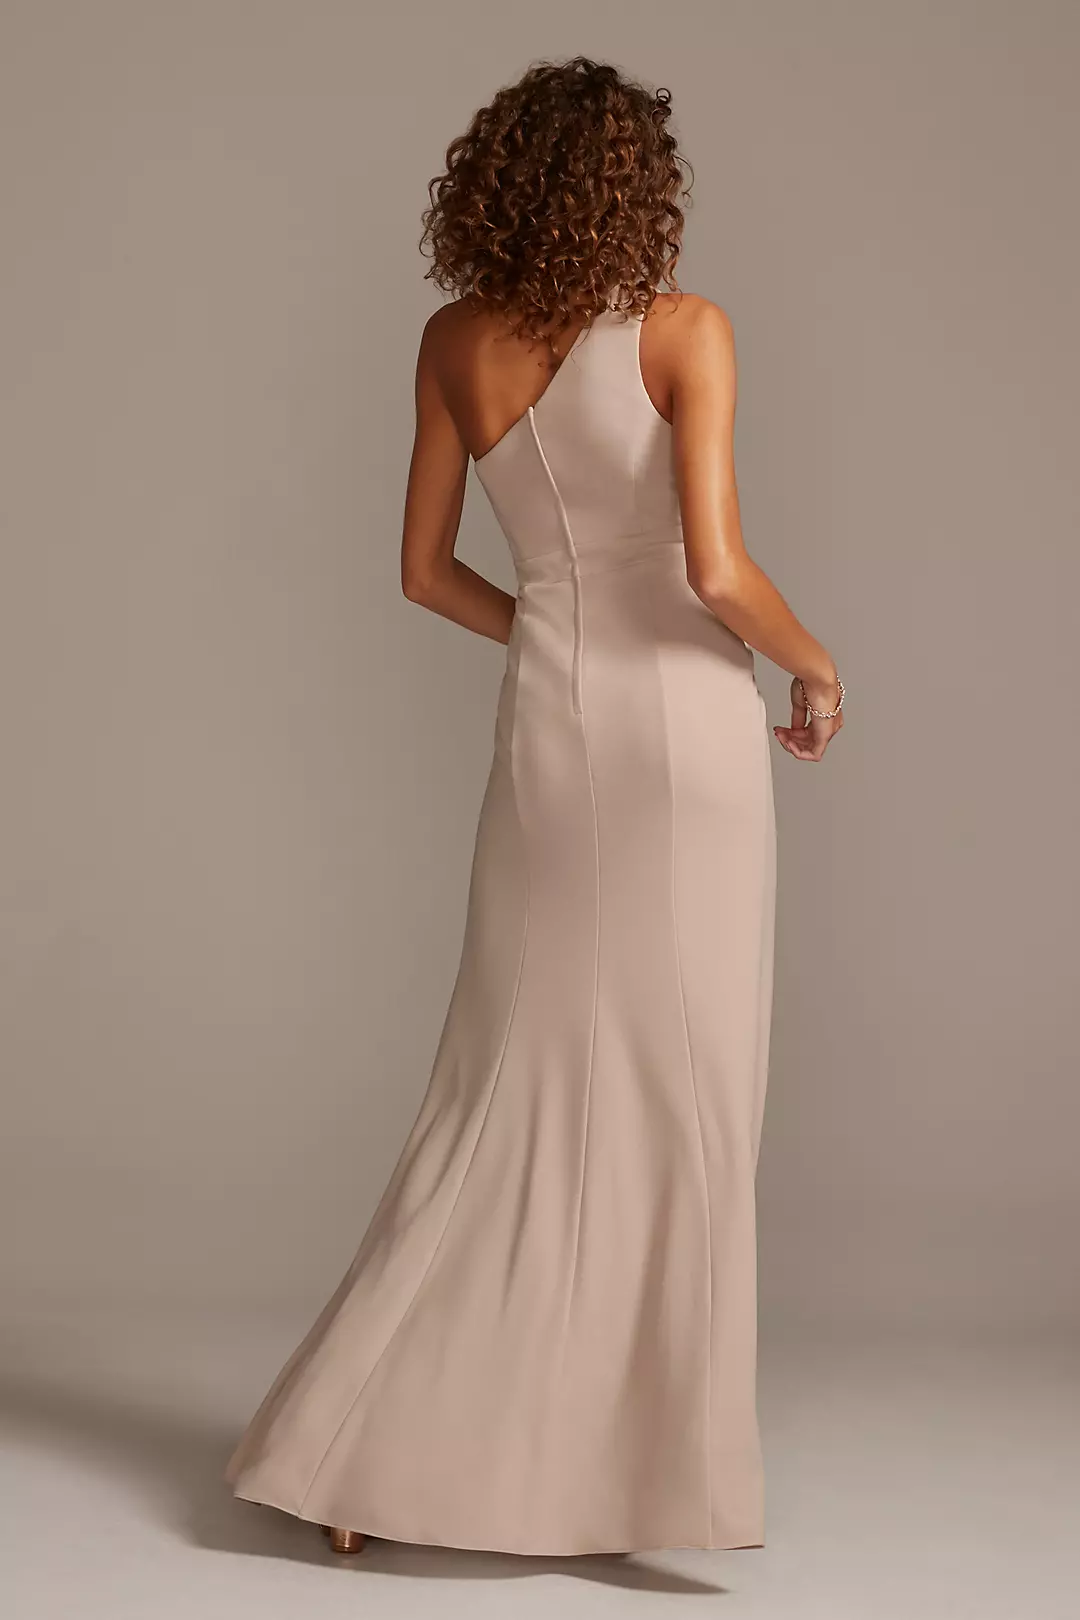 One-Shoulder Stretch Crepe Tall Bridesmaid Dress Image 3